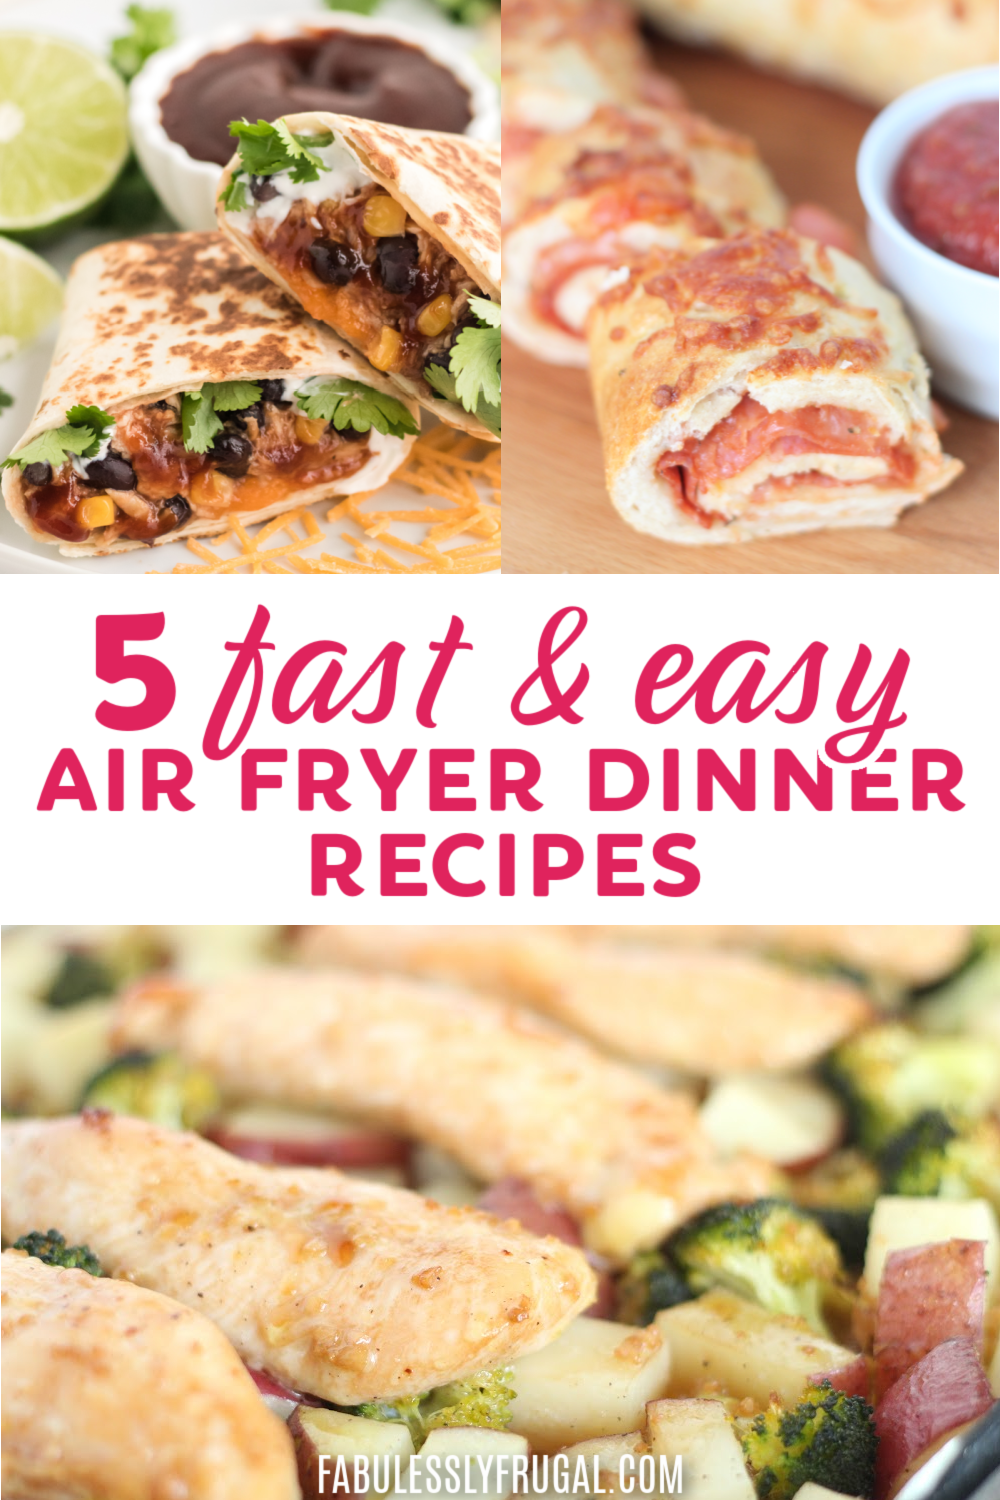 https://fabulesslyfrugal.com/wp-content/uploads/2021/08/5-of-the-best-air-fryer-recipes-that-are-fast-and-easy-1.png